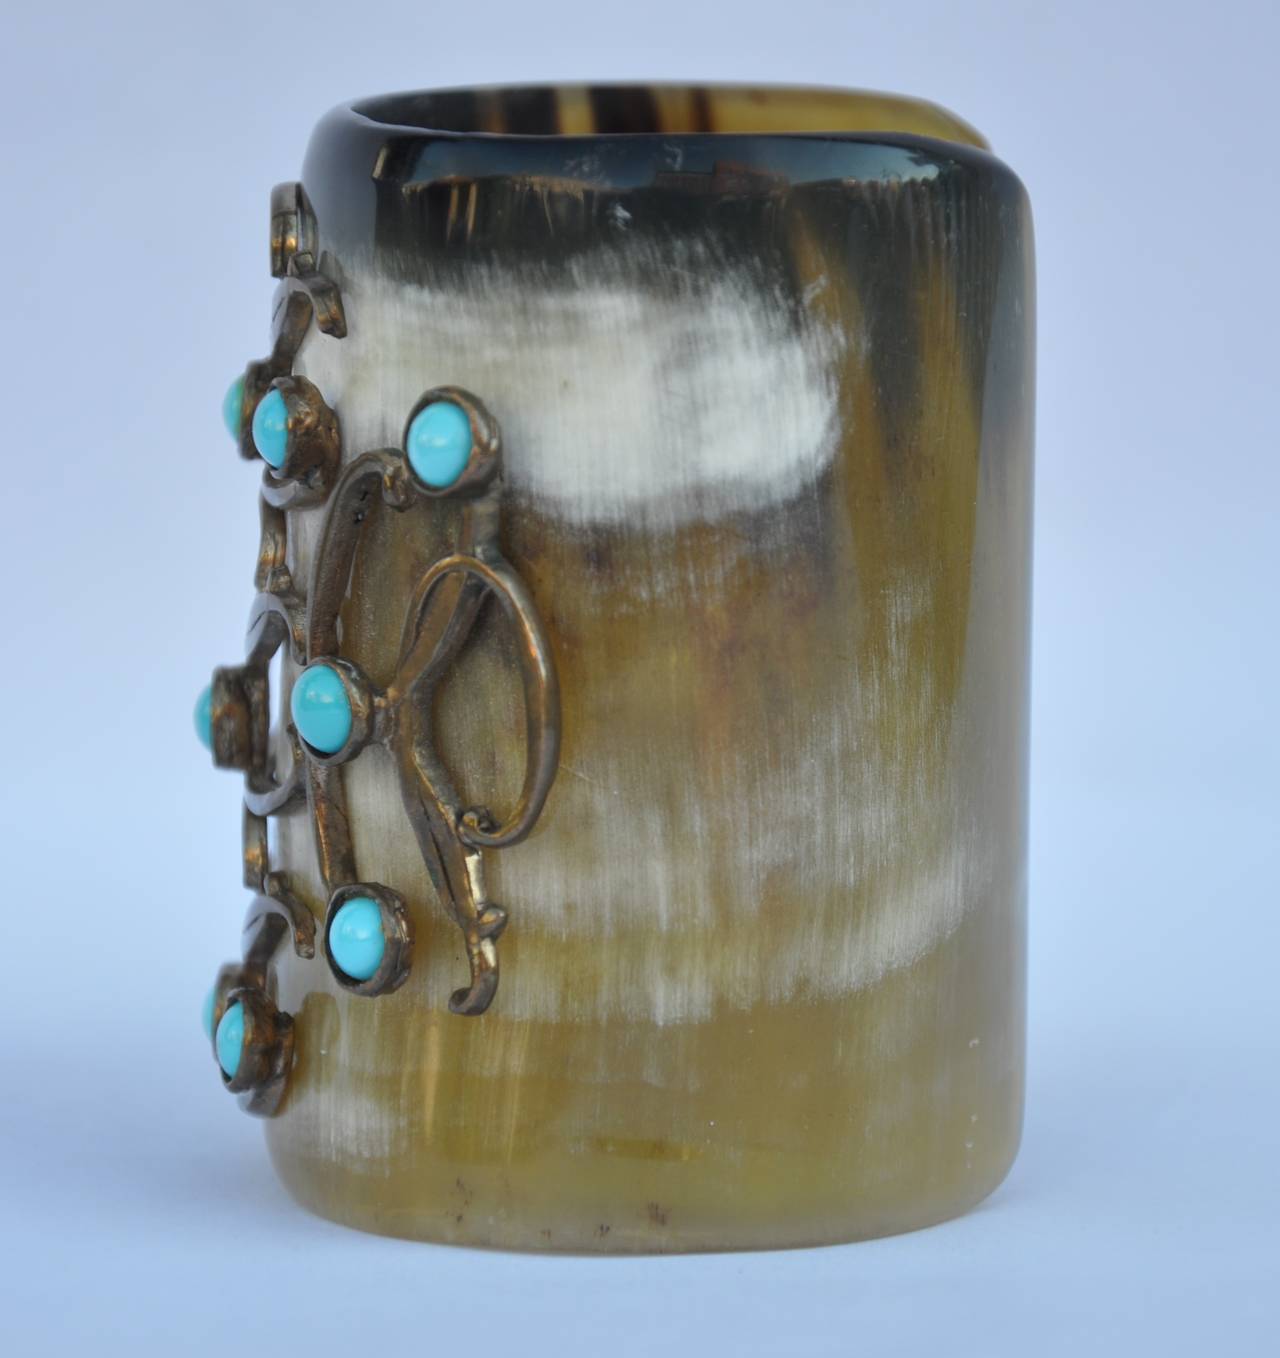          This rare, important and wonderfully detailed and signed Oscar de la Renta horn cuff is accented with detailed tortoise stones surrounded with swirls of brass. The total height measures 3". The circumference ranges from 2 1/8" to